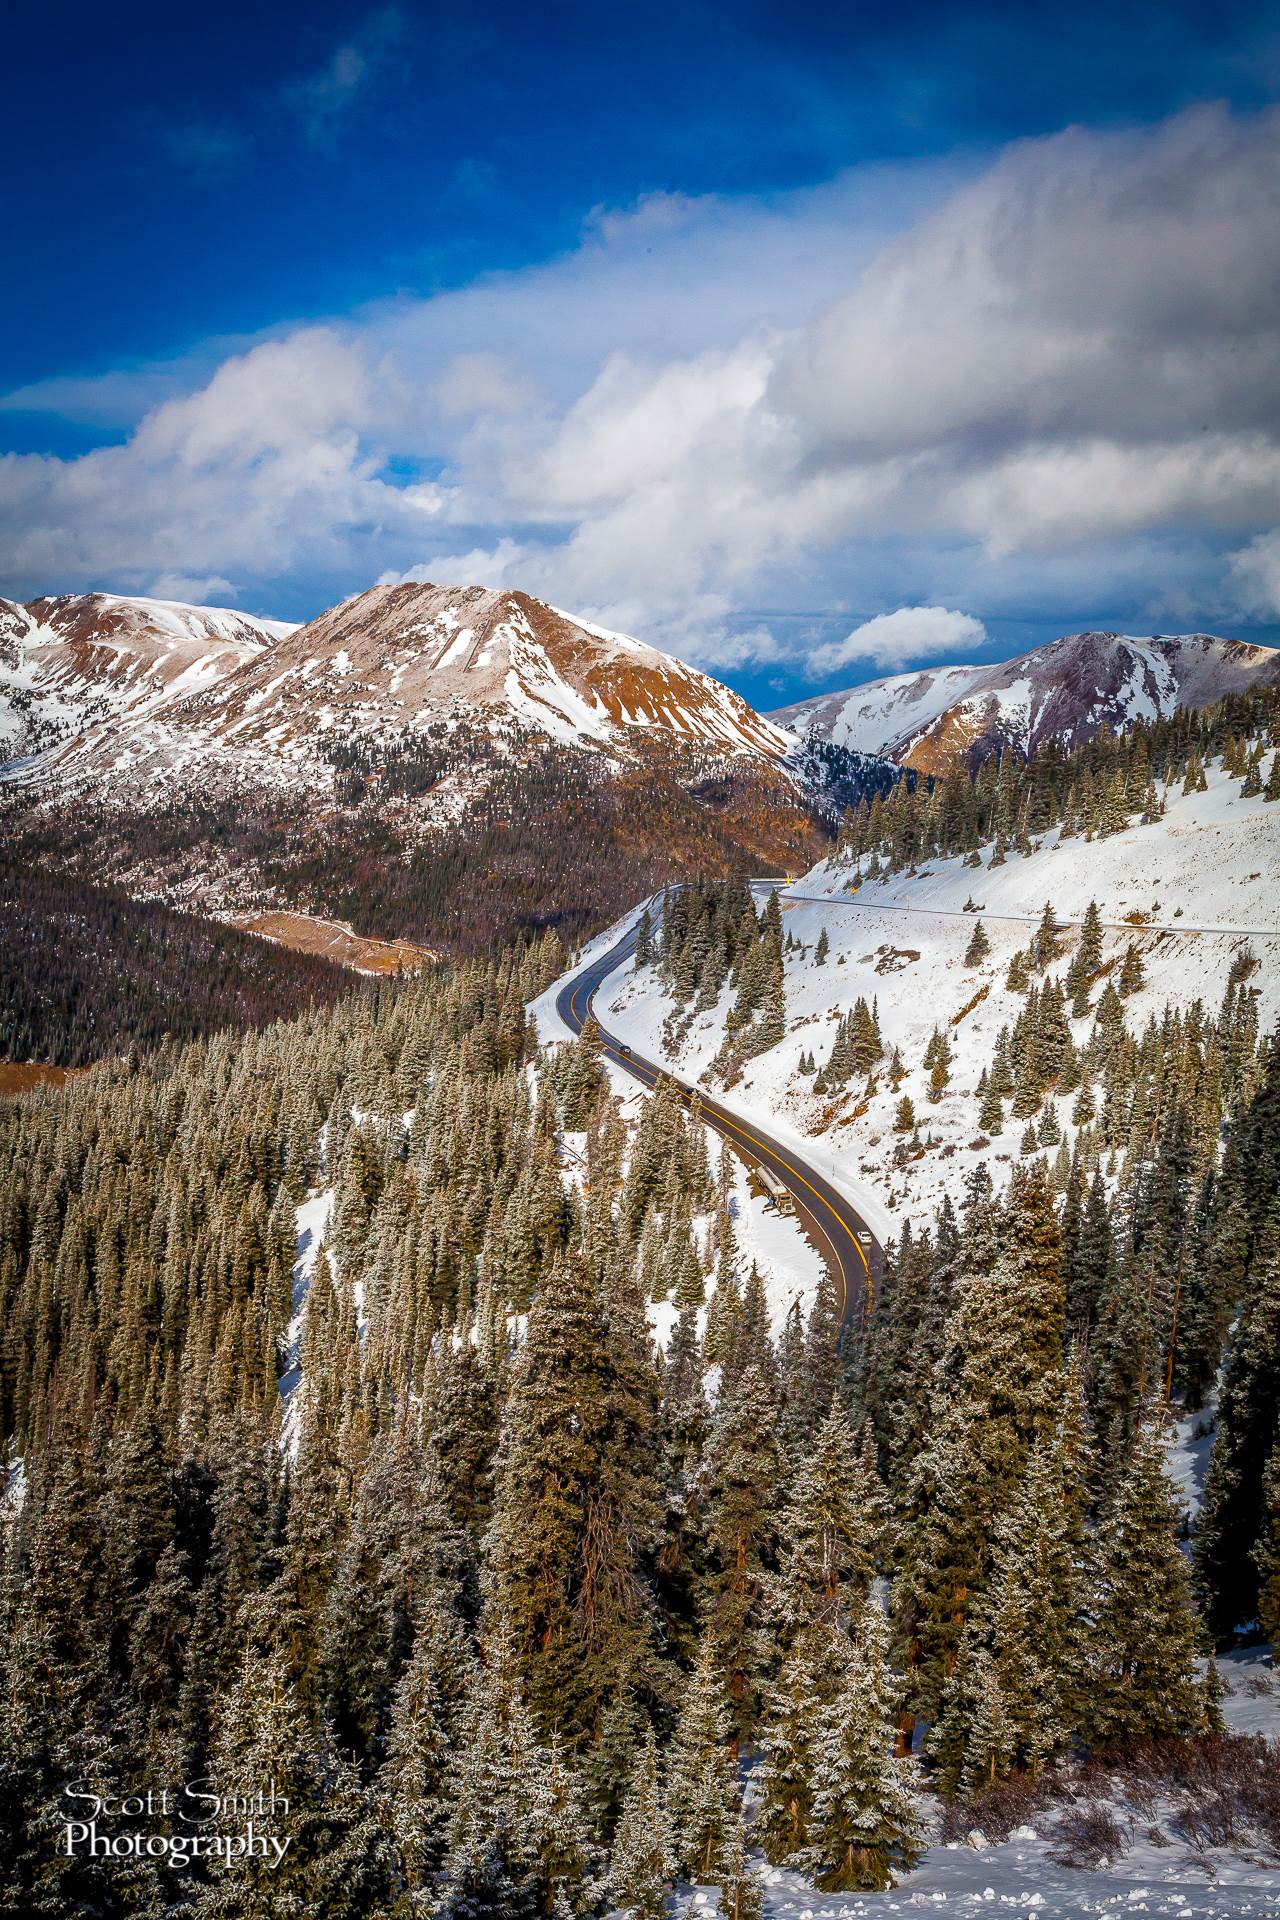 Loveland Pass - Heading back home from A-basin via Loveland Pass after a day of snowboarding. by Scott Smith Photos